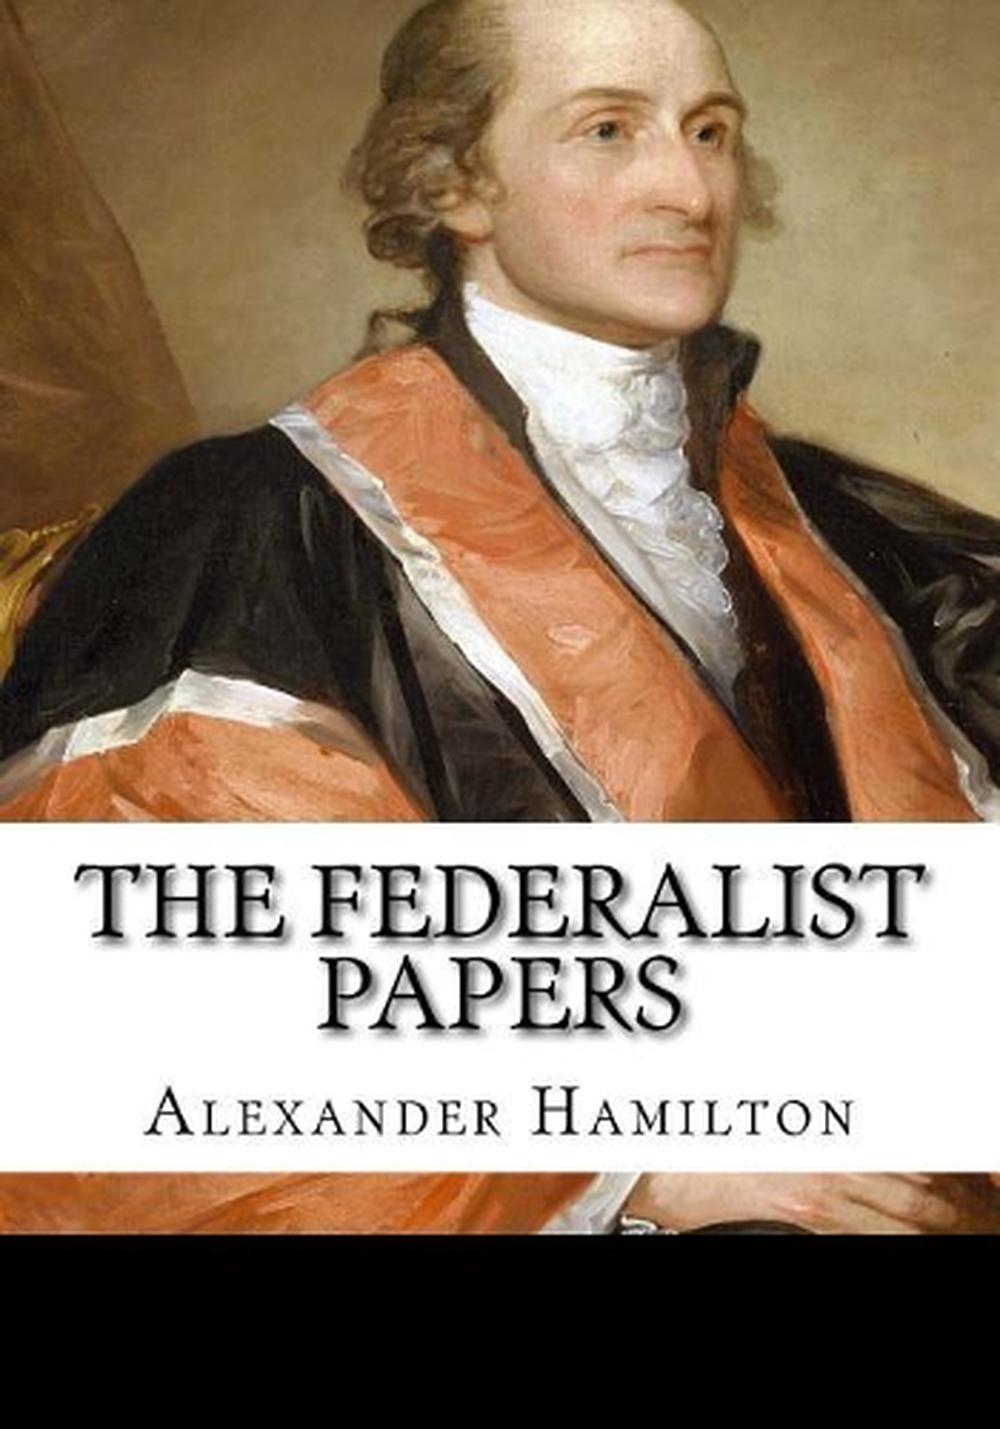 the federalist papers were written by